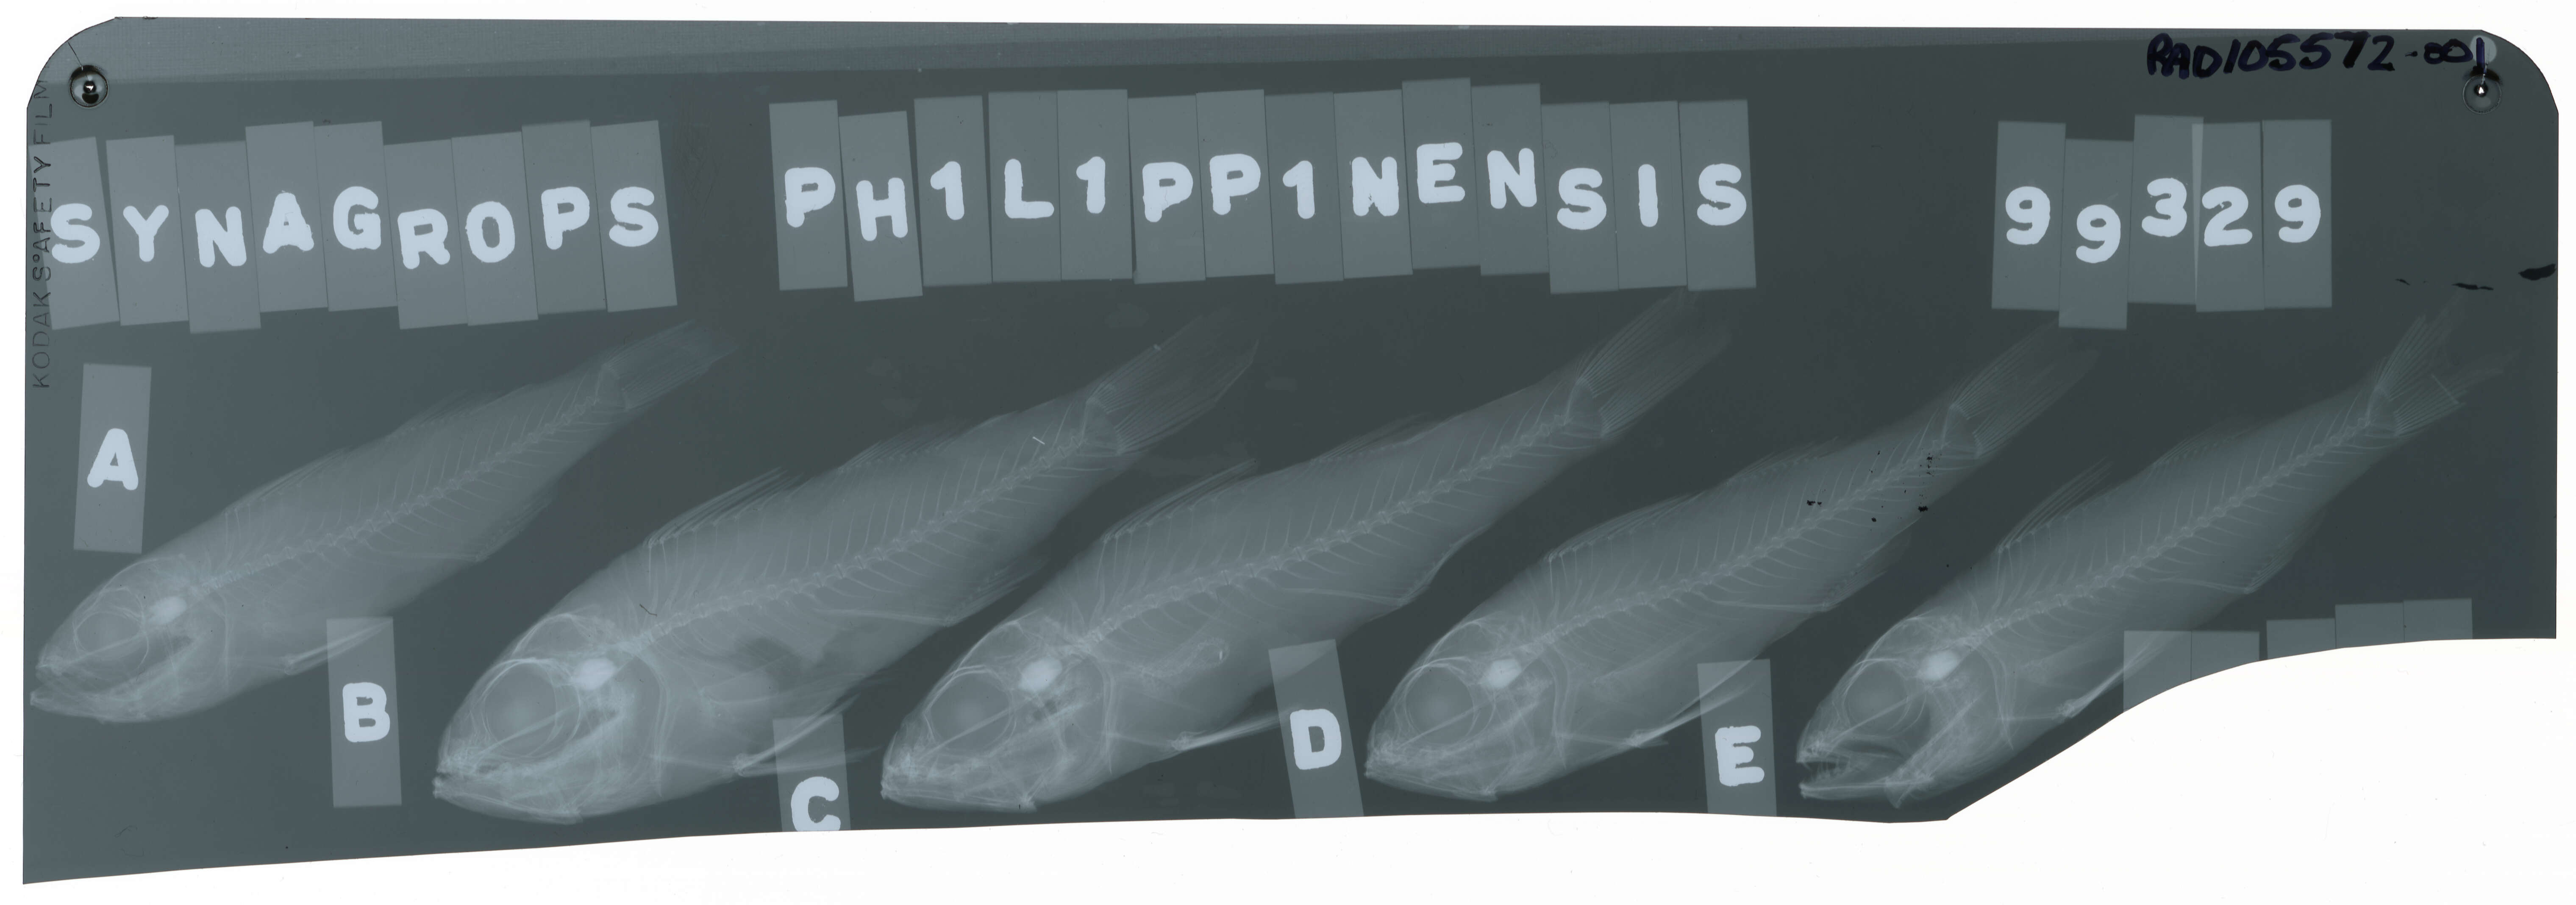 Image of ray-finned fishes